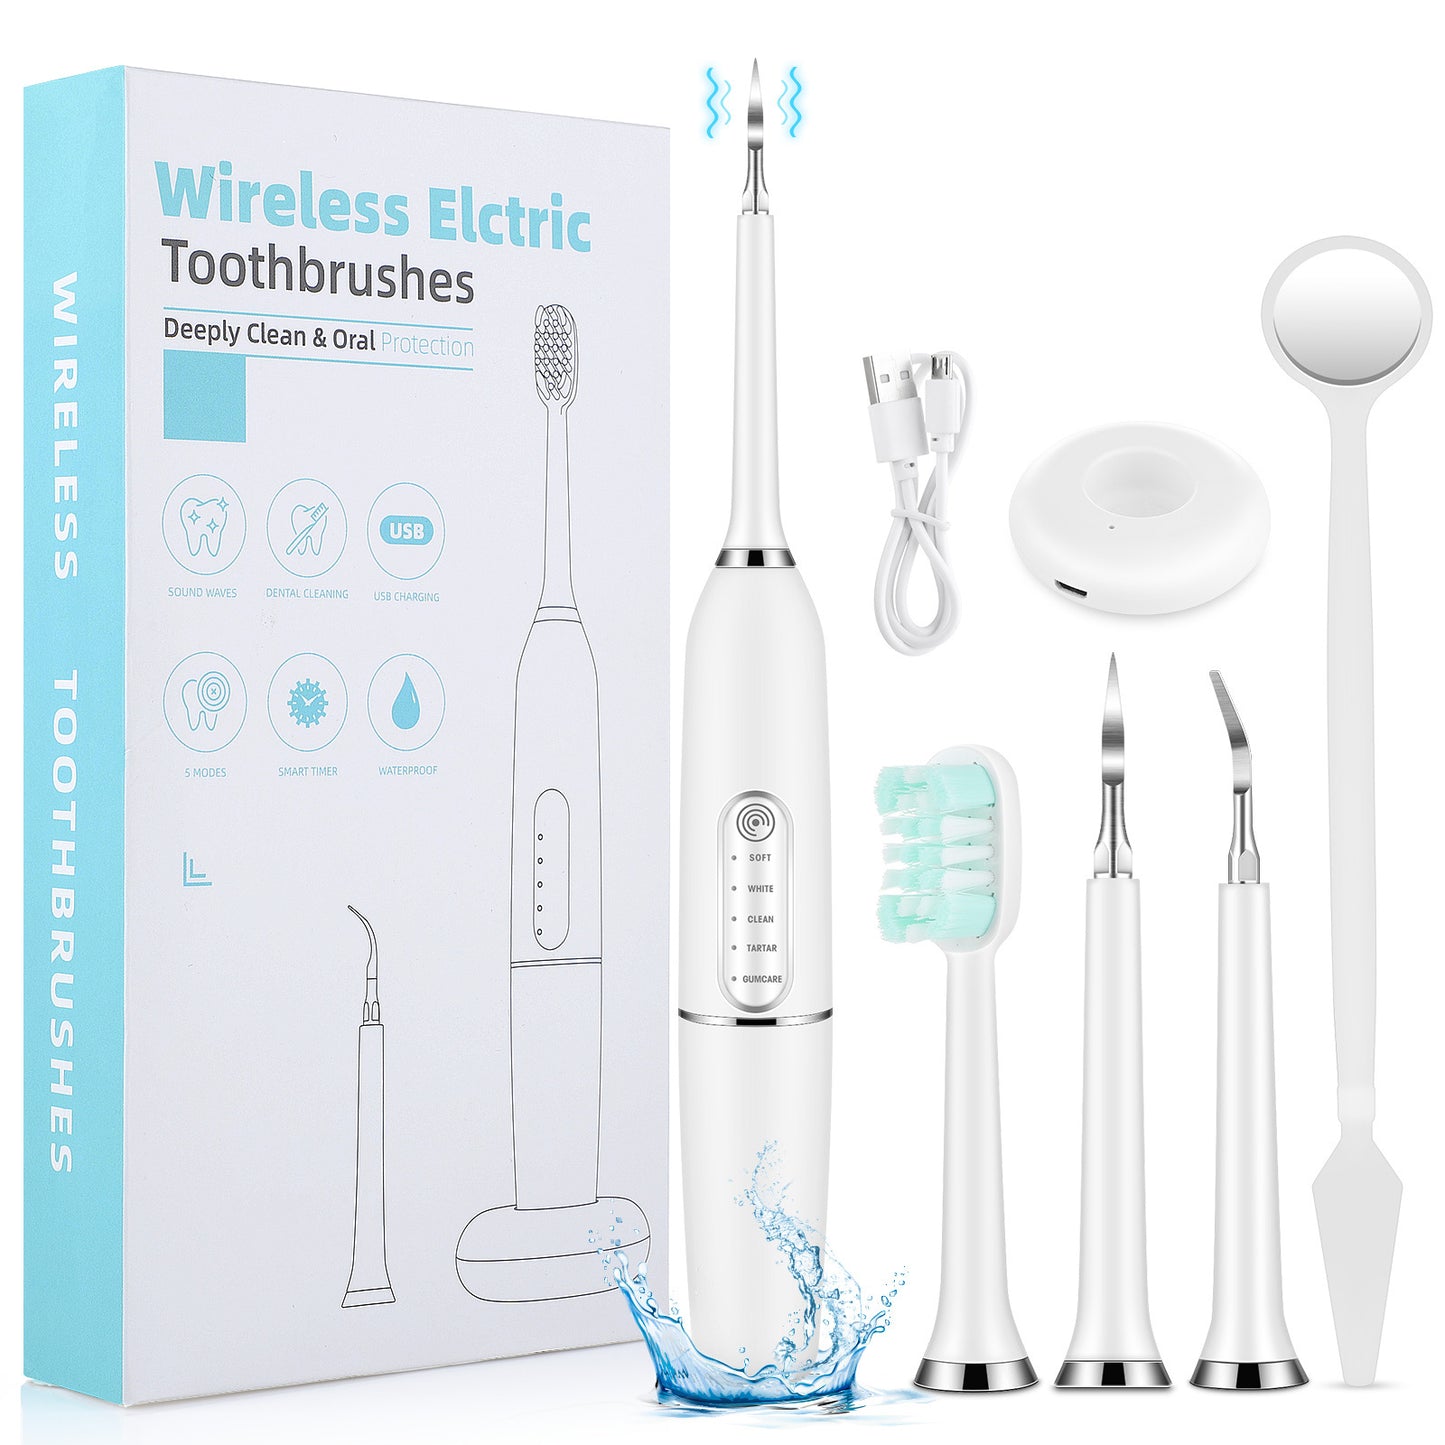 Portable Electric Tooth Cleaner, Dental Care Tool, Tooth Cleaner